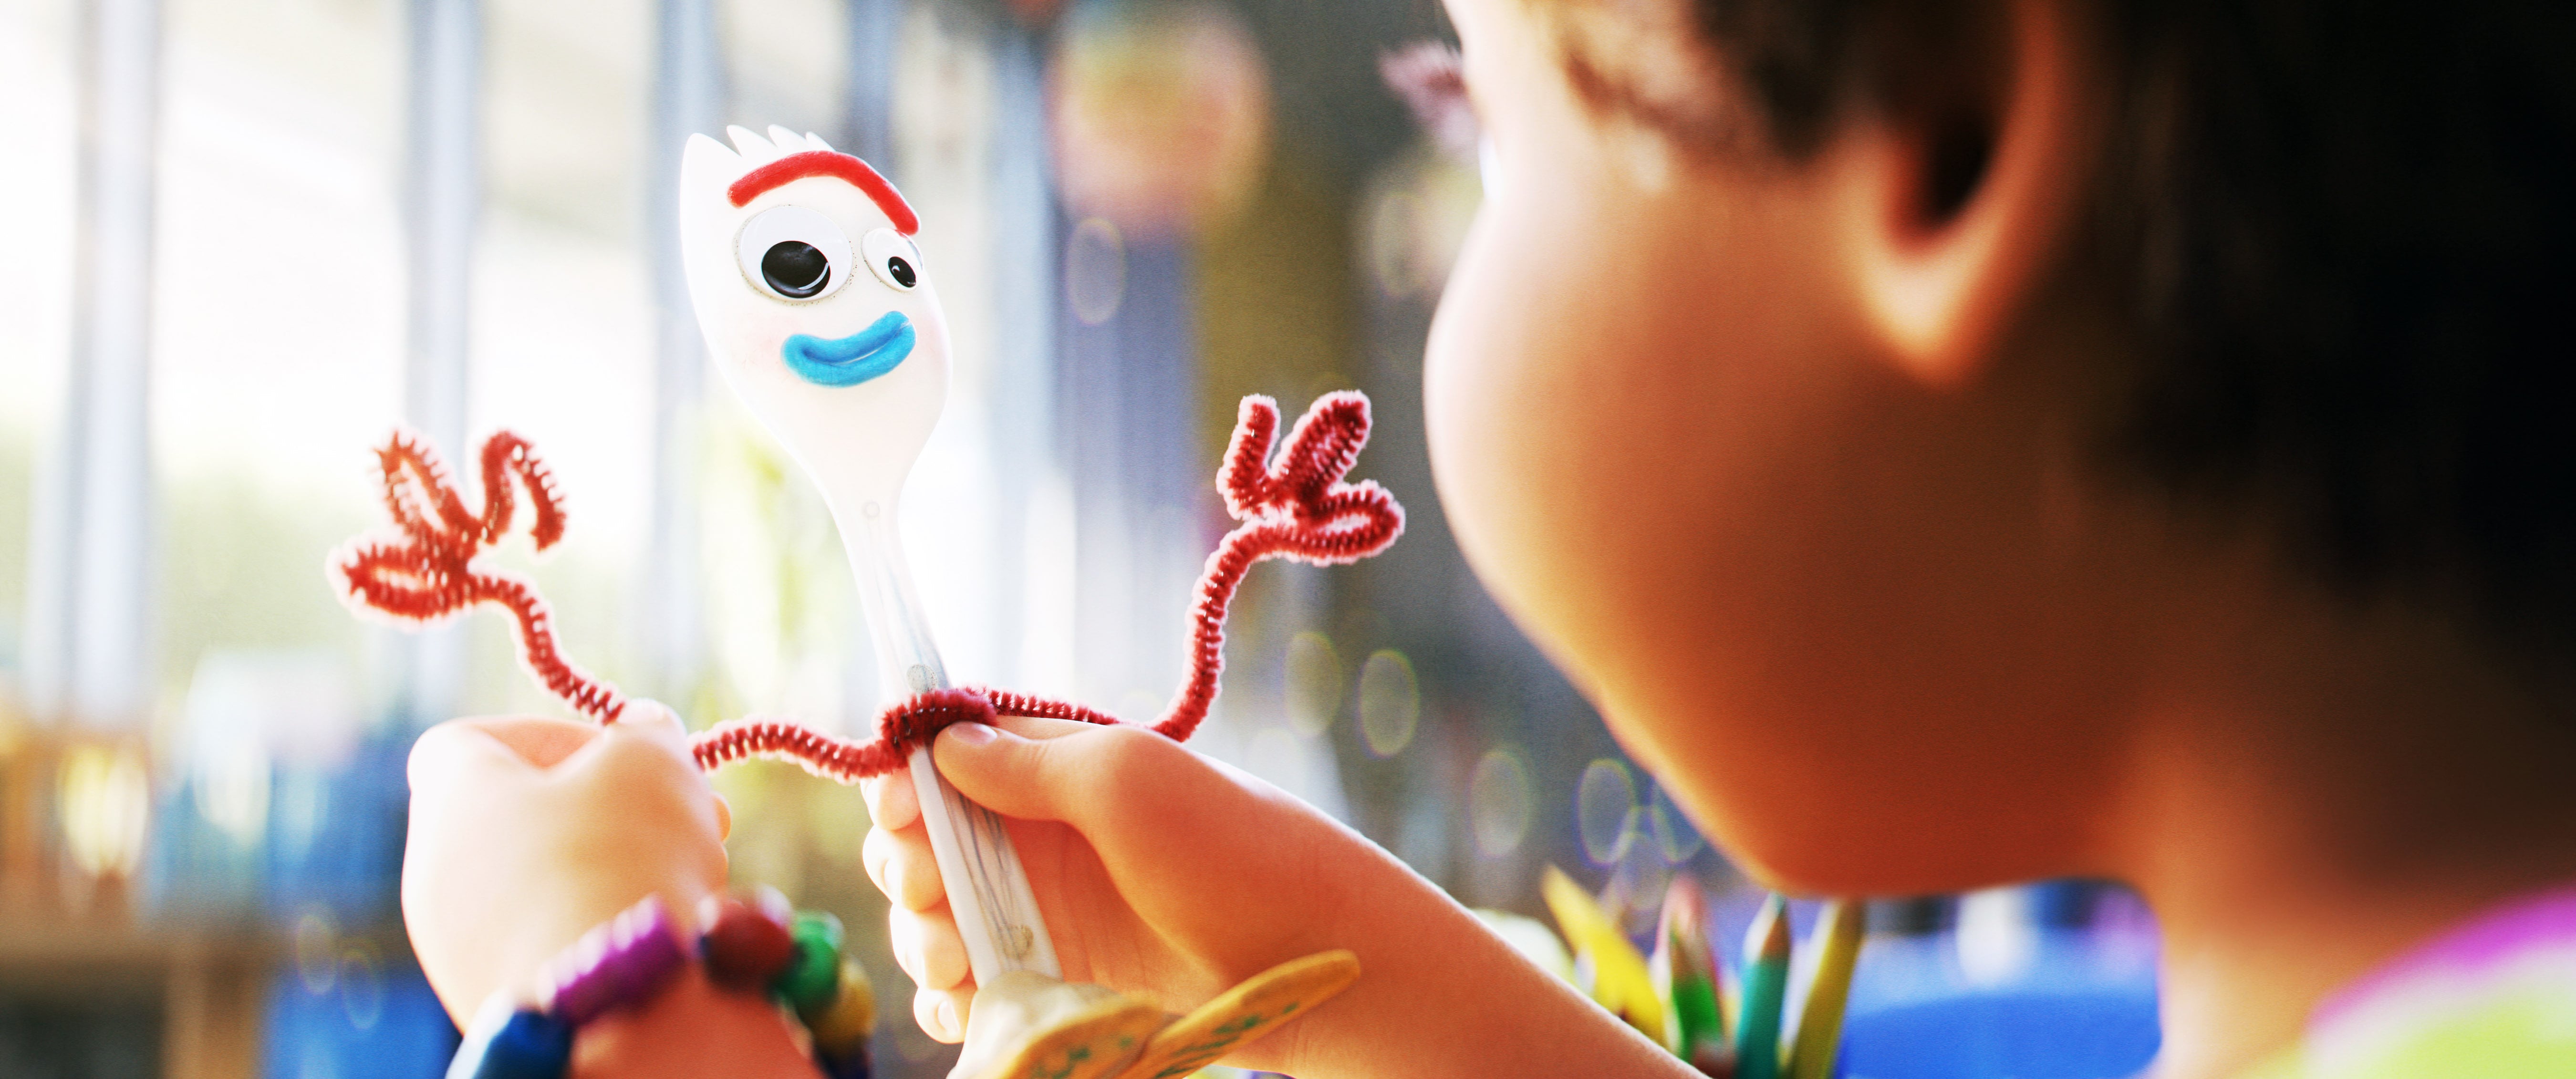 Disney recalls 'Toy Story 4' 'Forky' toys - L.A. Business First